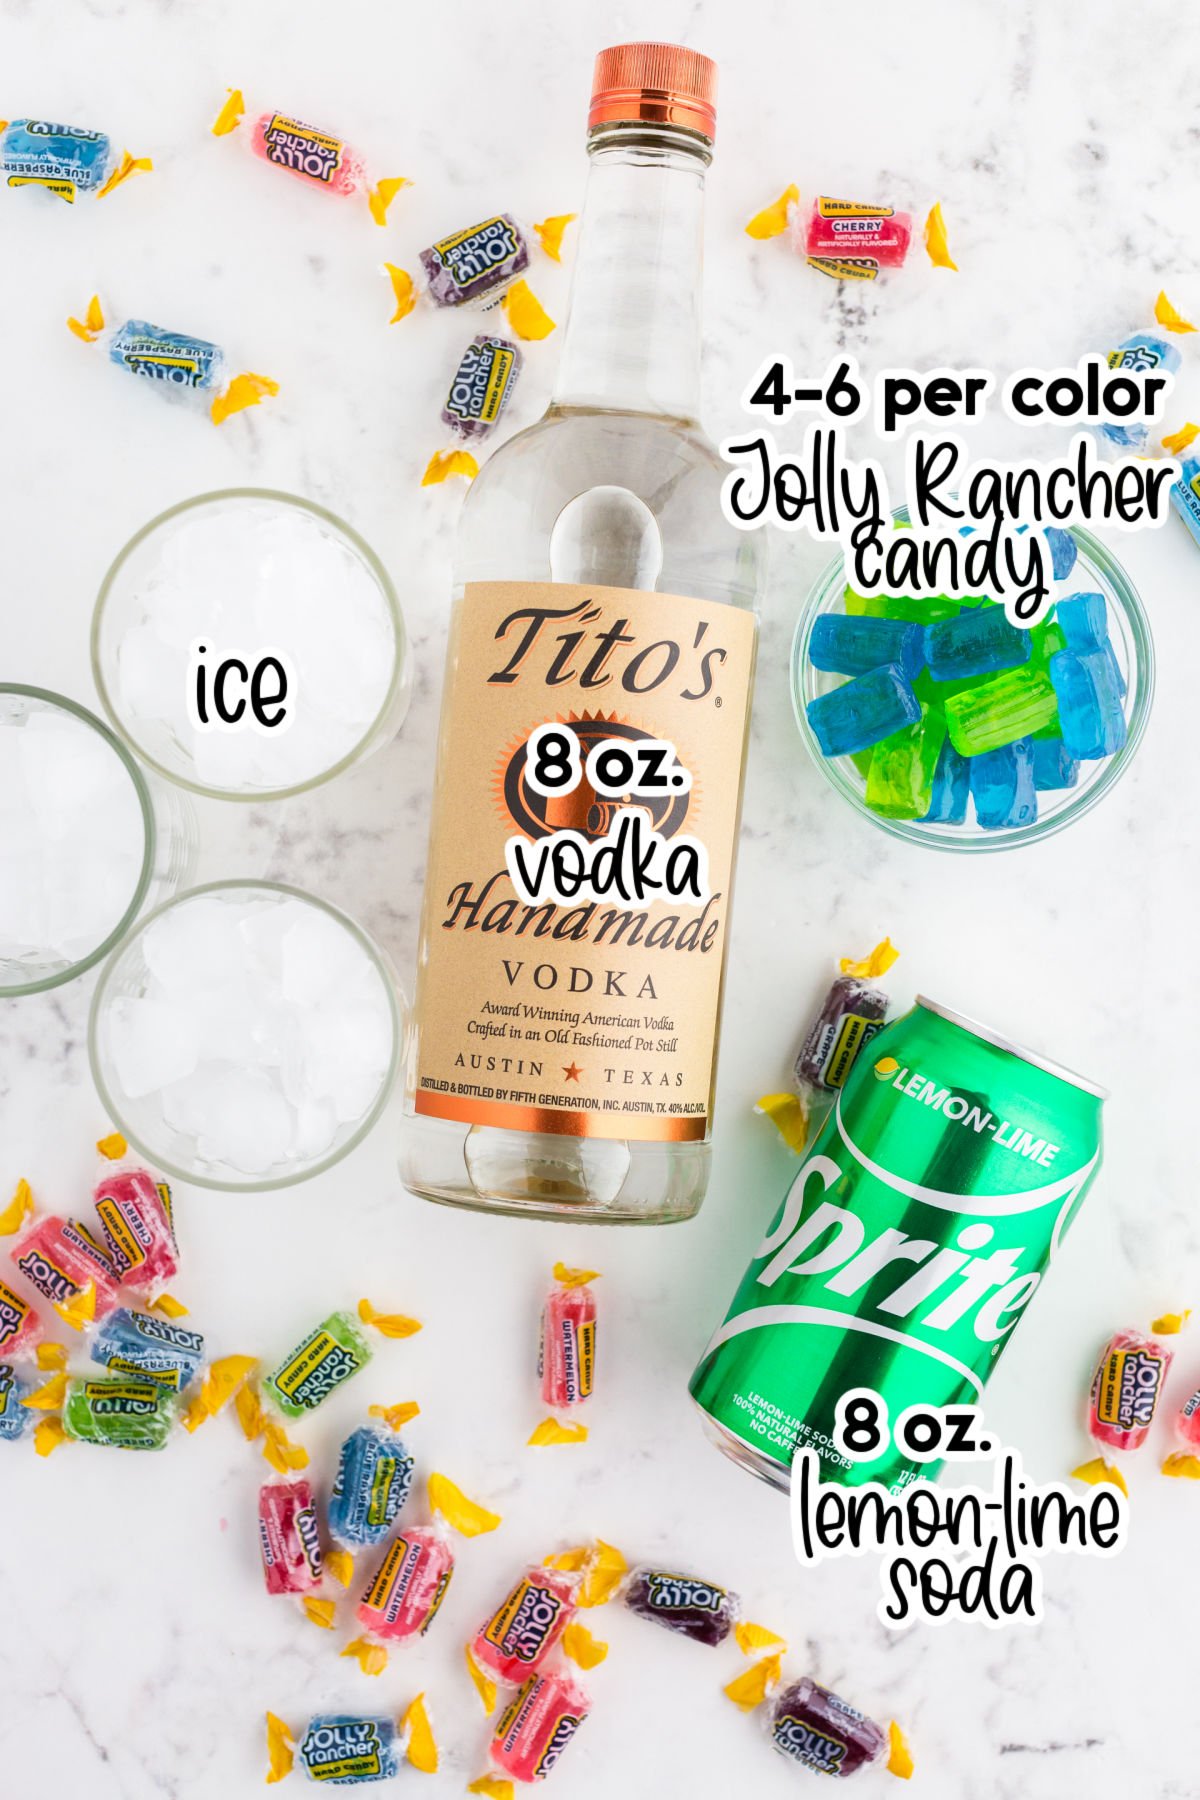 Ingredients for jolly rancher cocktail: 3 glasses filled with ice, a bottle of vodka, lemon soda can, jolly rancher candy on a marble countertop with text labels.